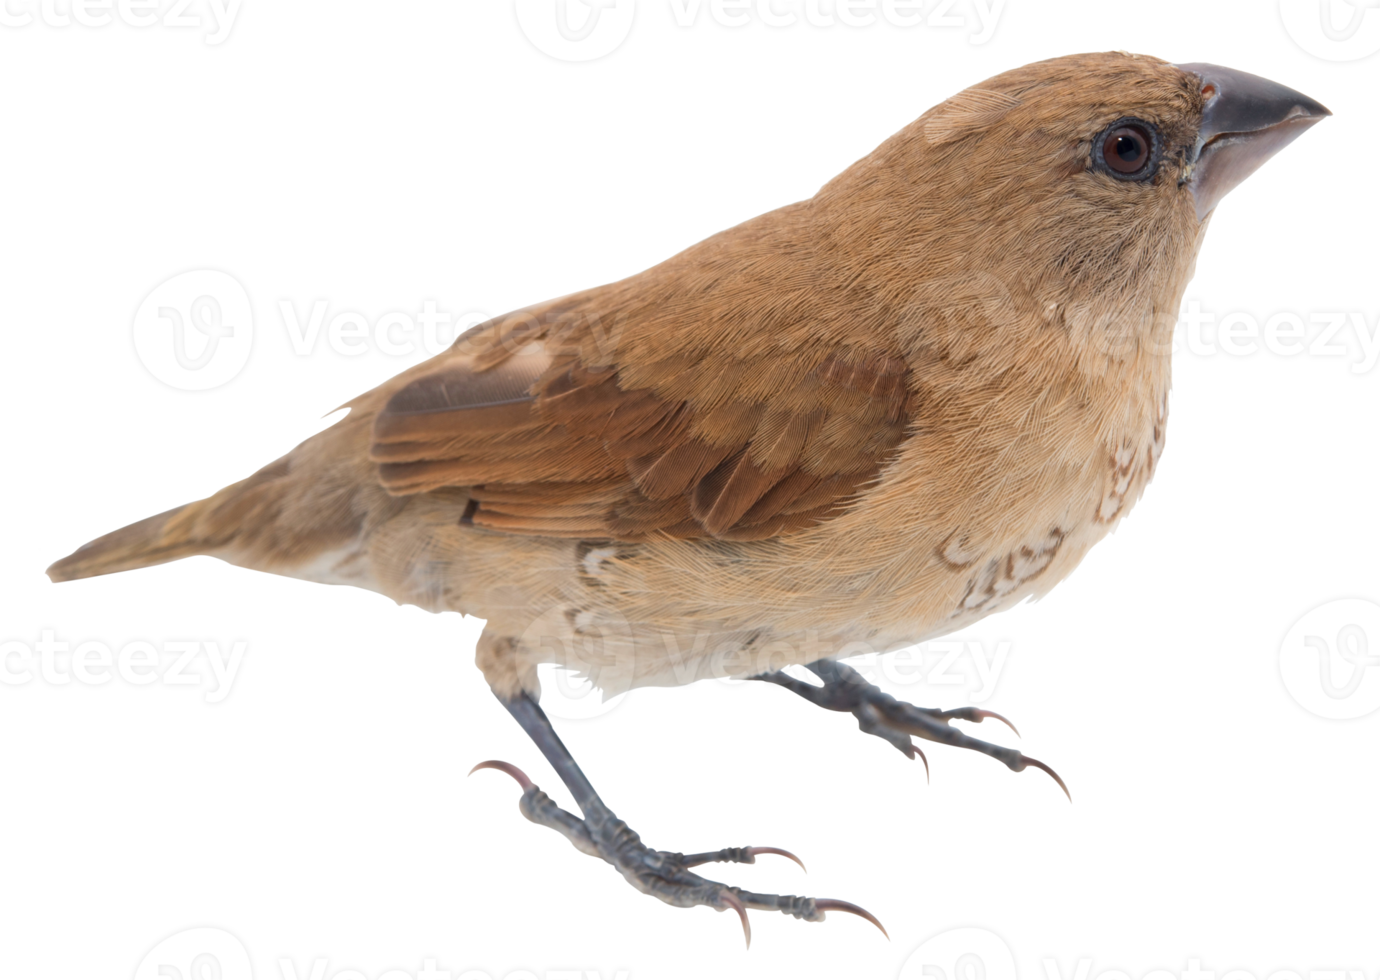 House Sparrow Against Isolated 13165923 Png